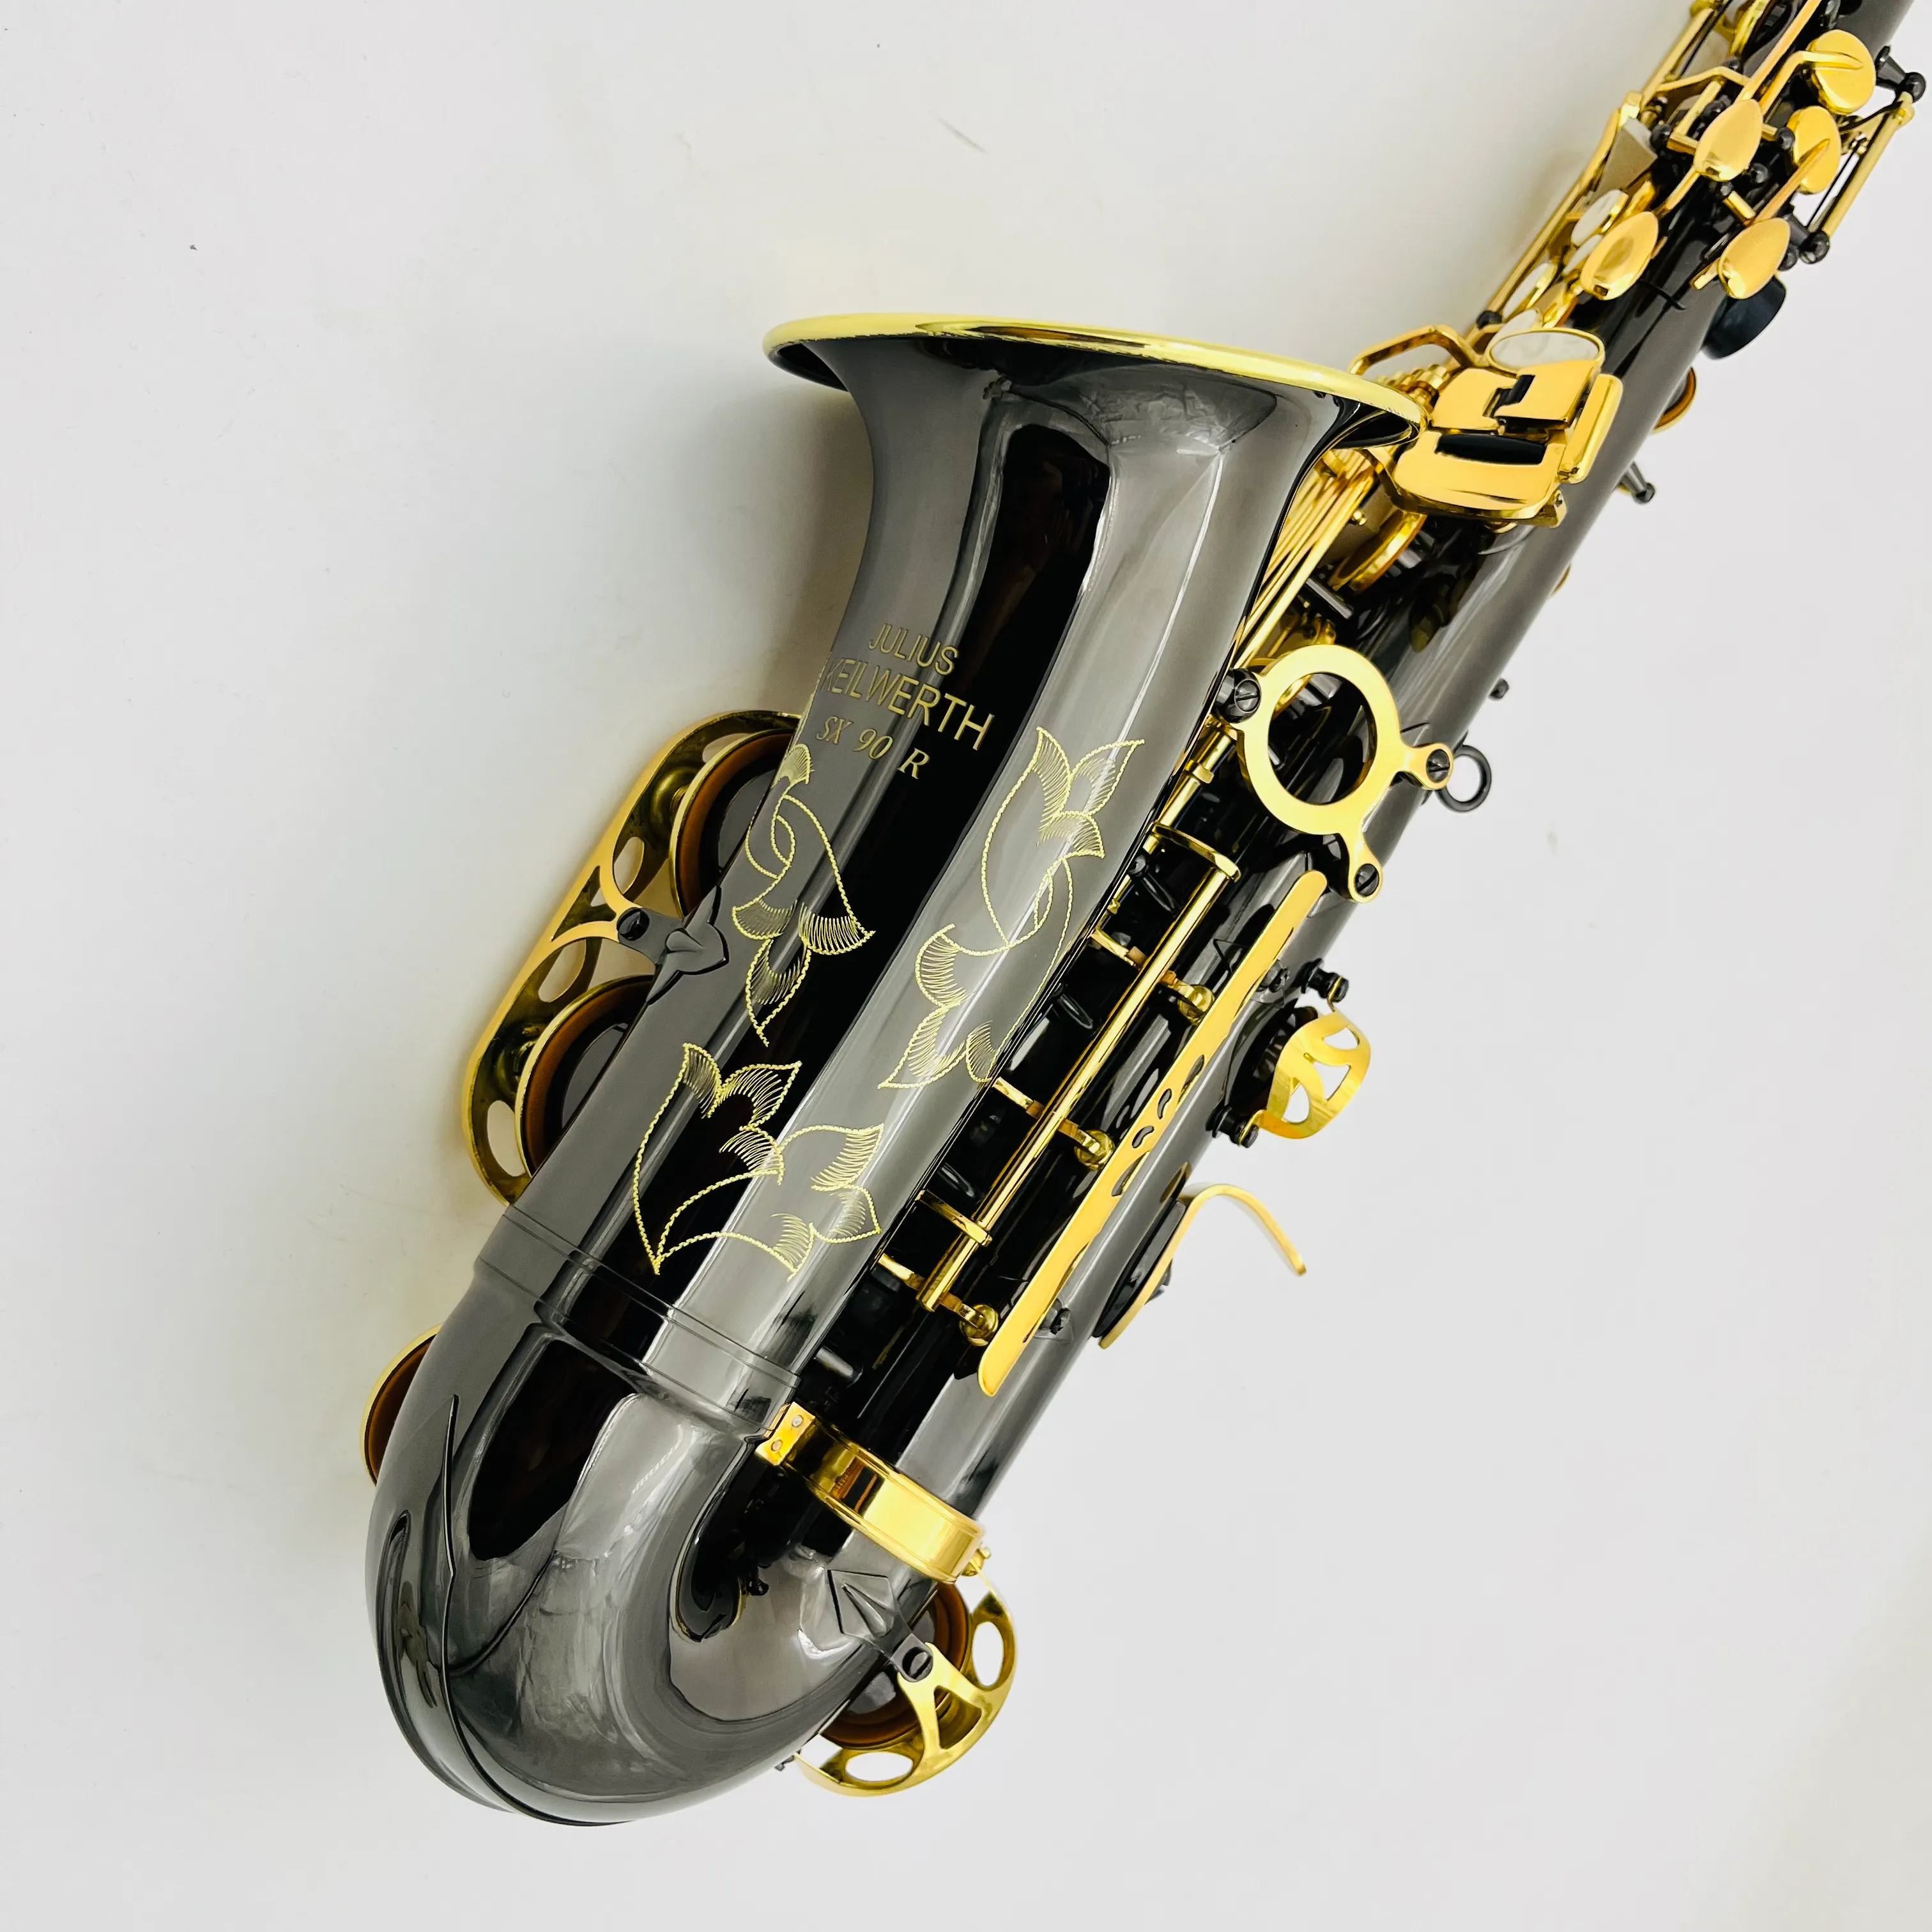 Professional Alto Saxophone Keilwerth SX90R Brass Black Plated Nickel Gold Eb Tune Sax Wood Musical Instrument with Case